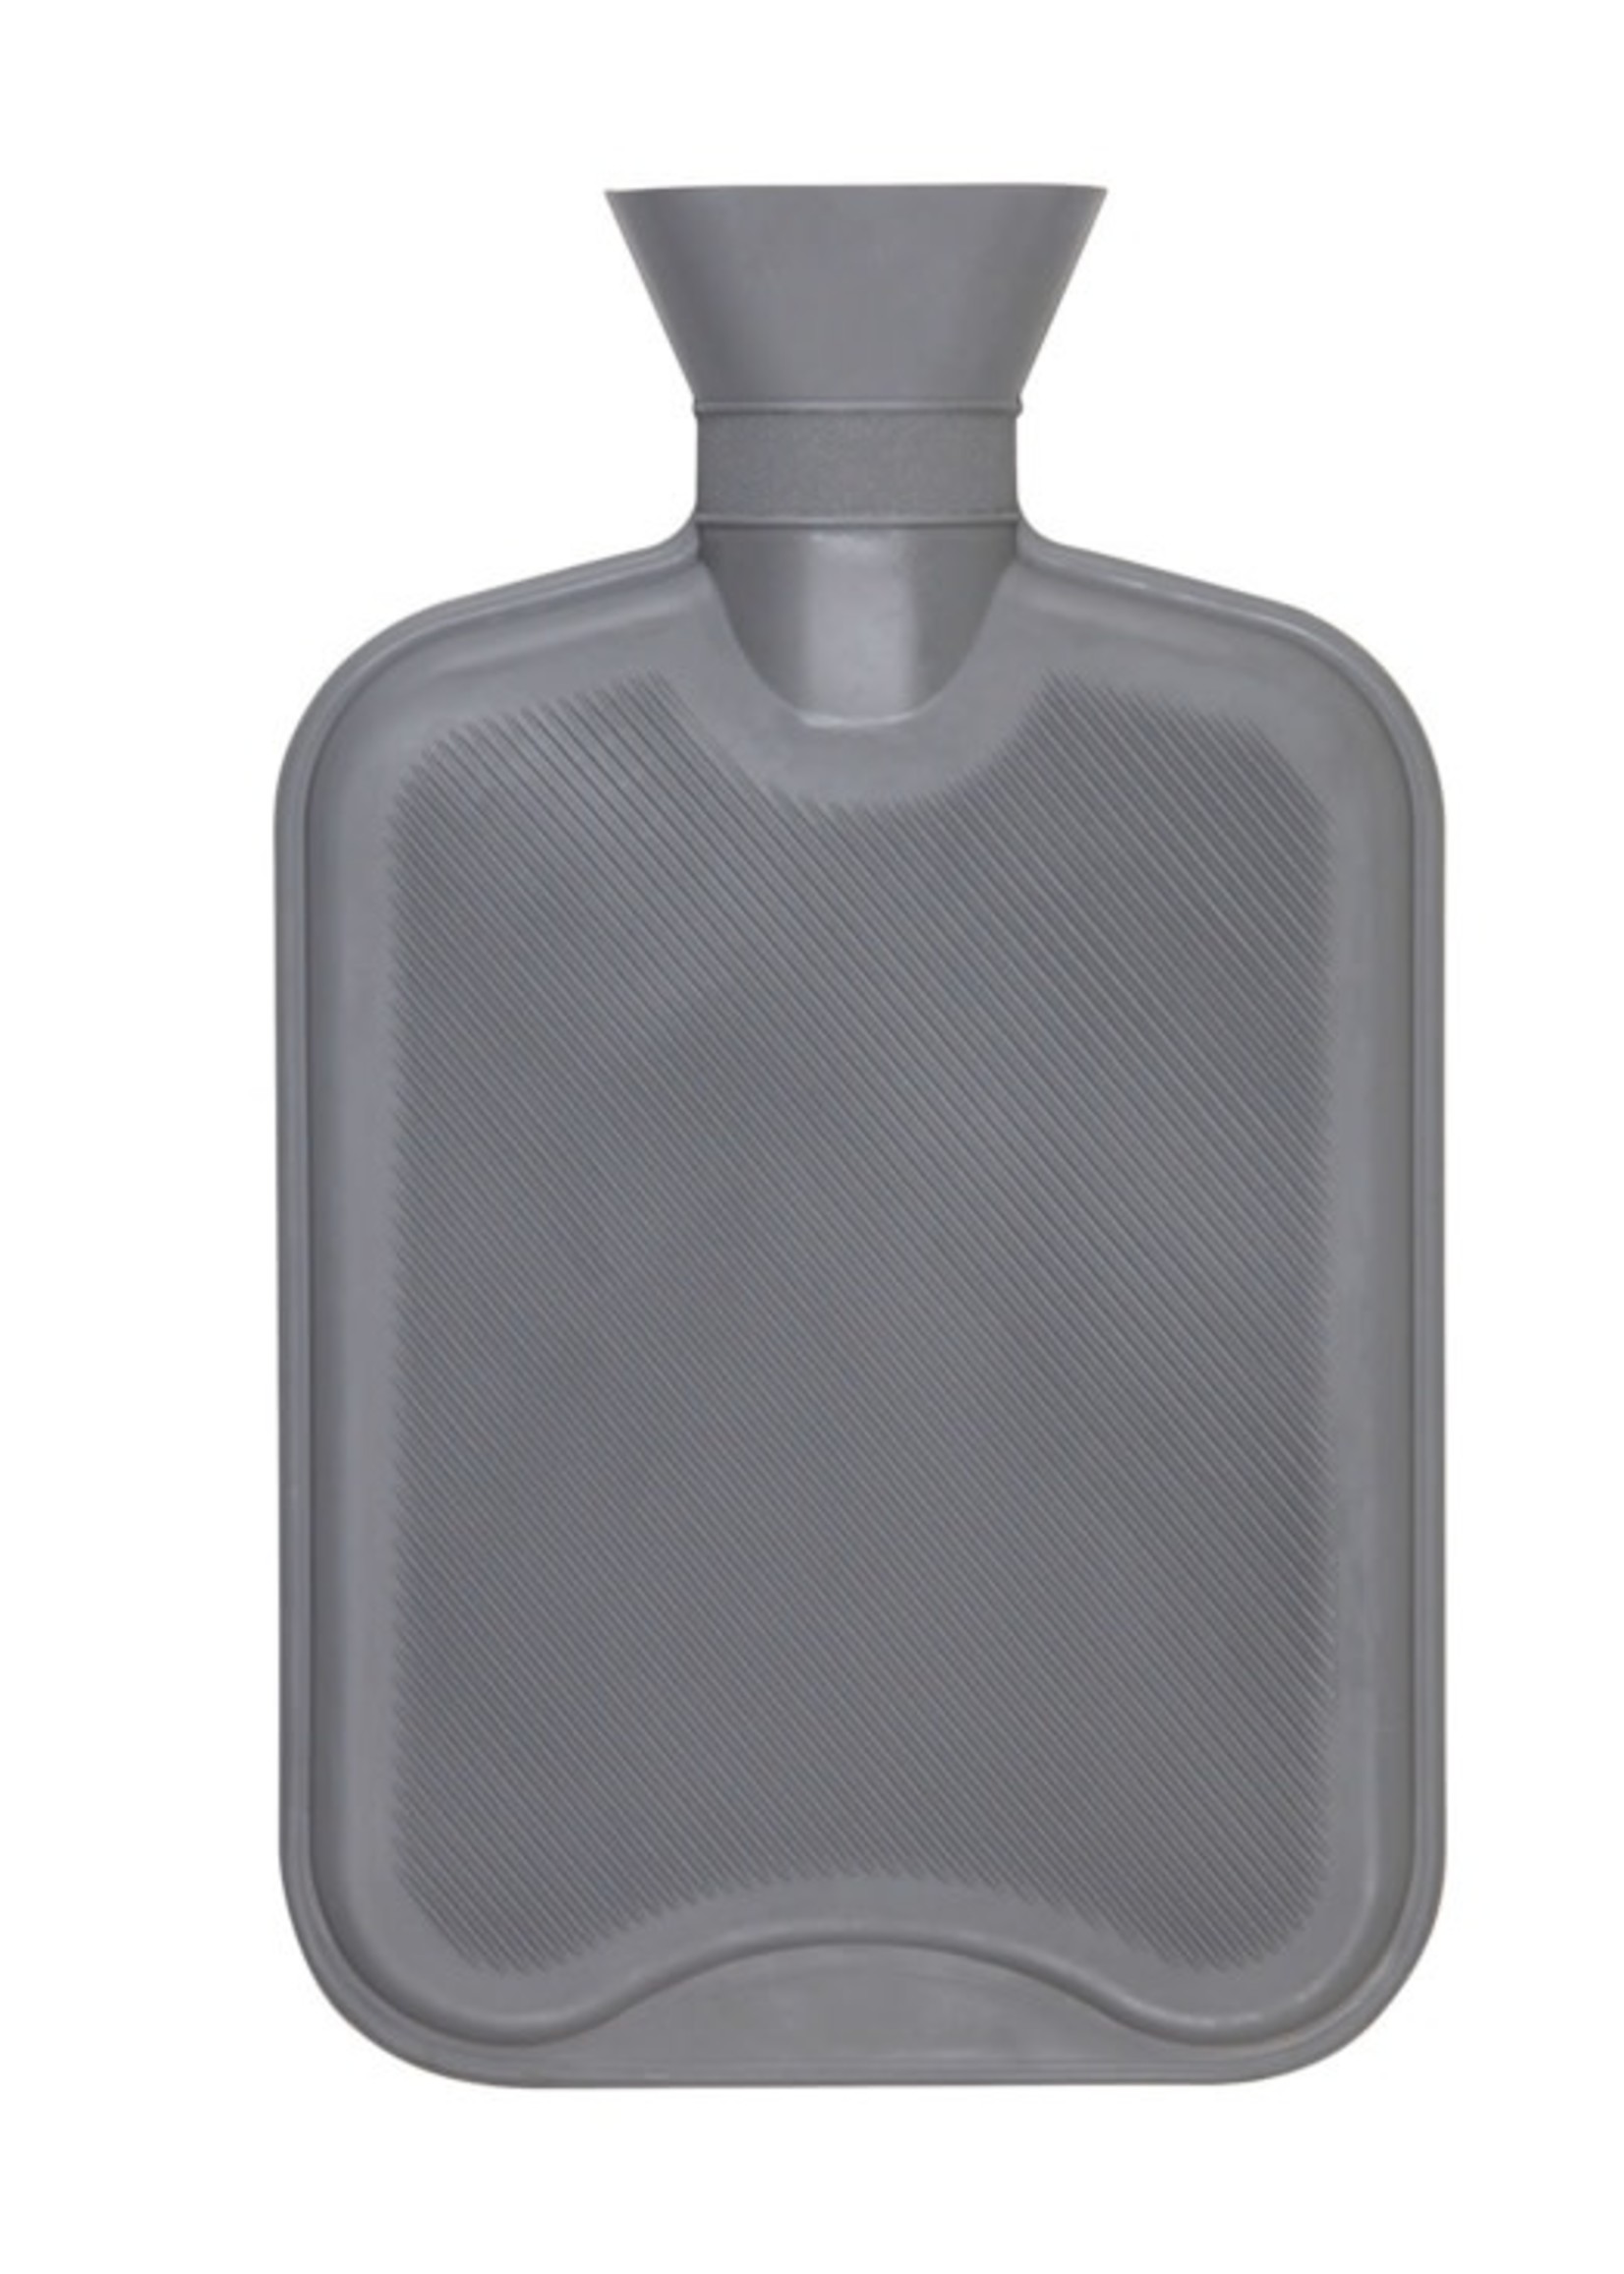 Hearth and Home Hot Water Bottle 2L - Grey